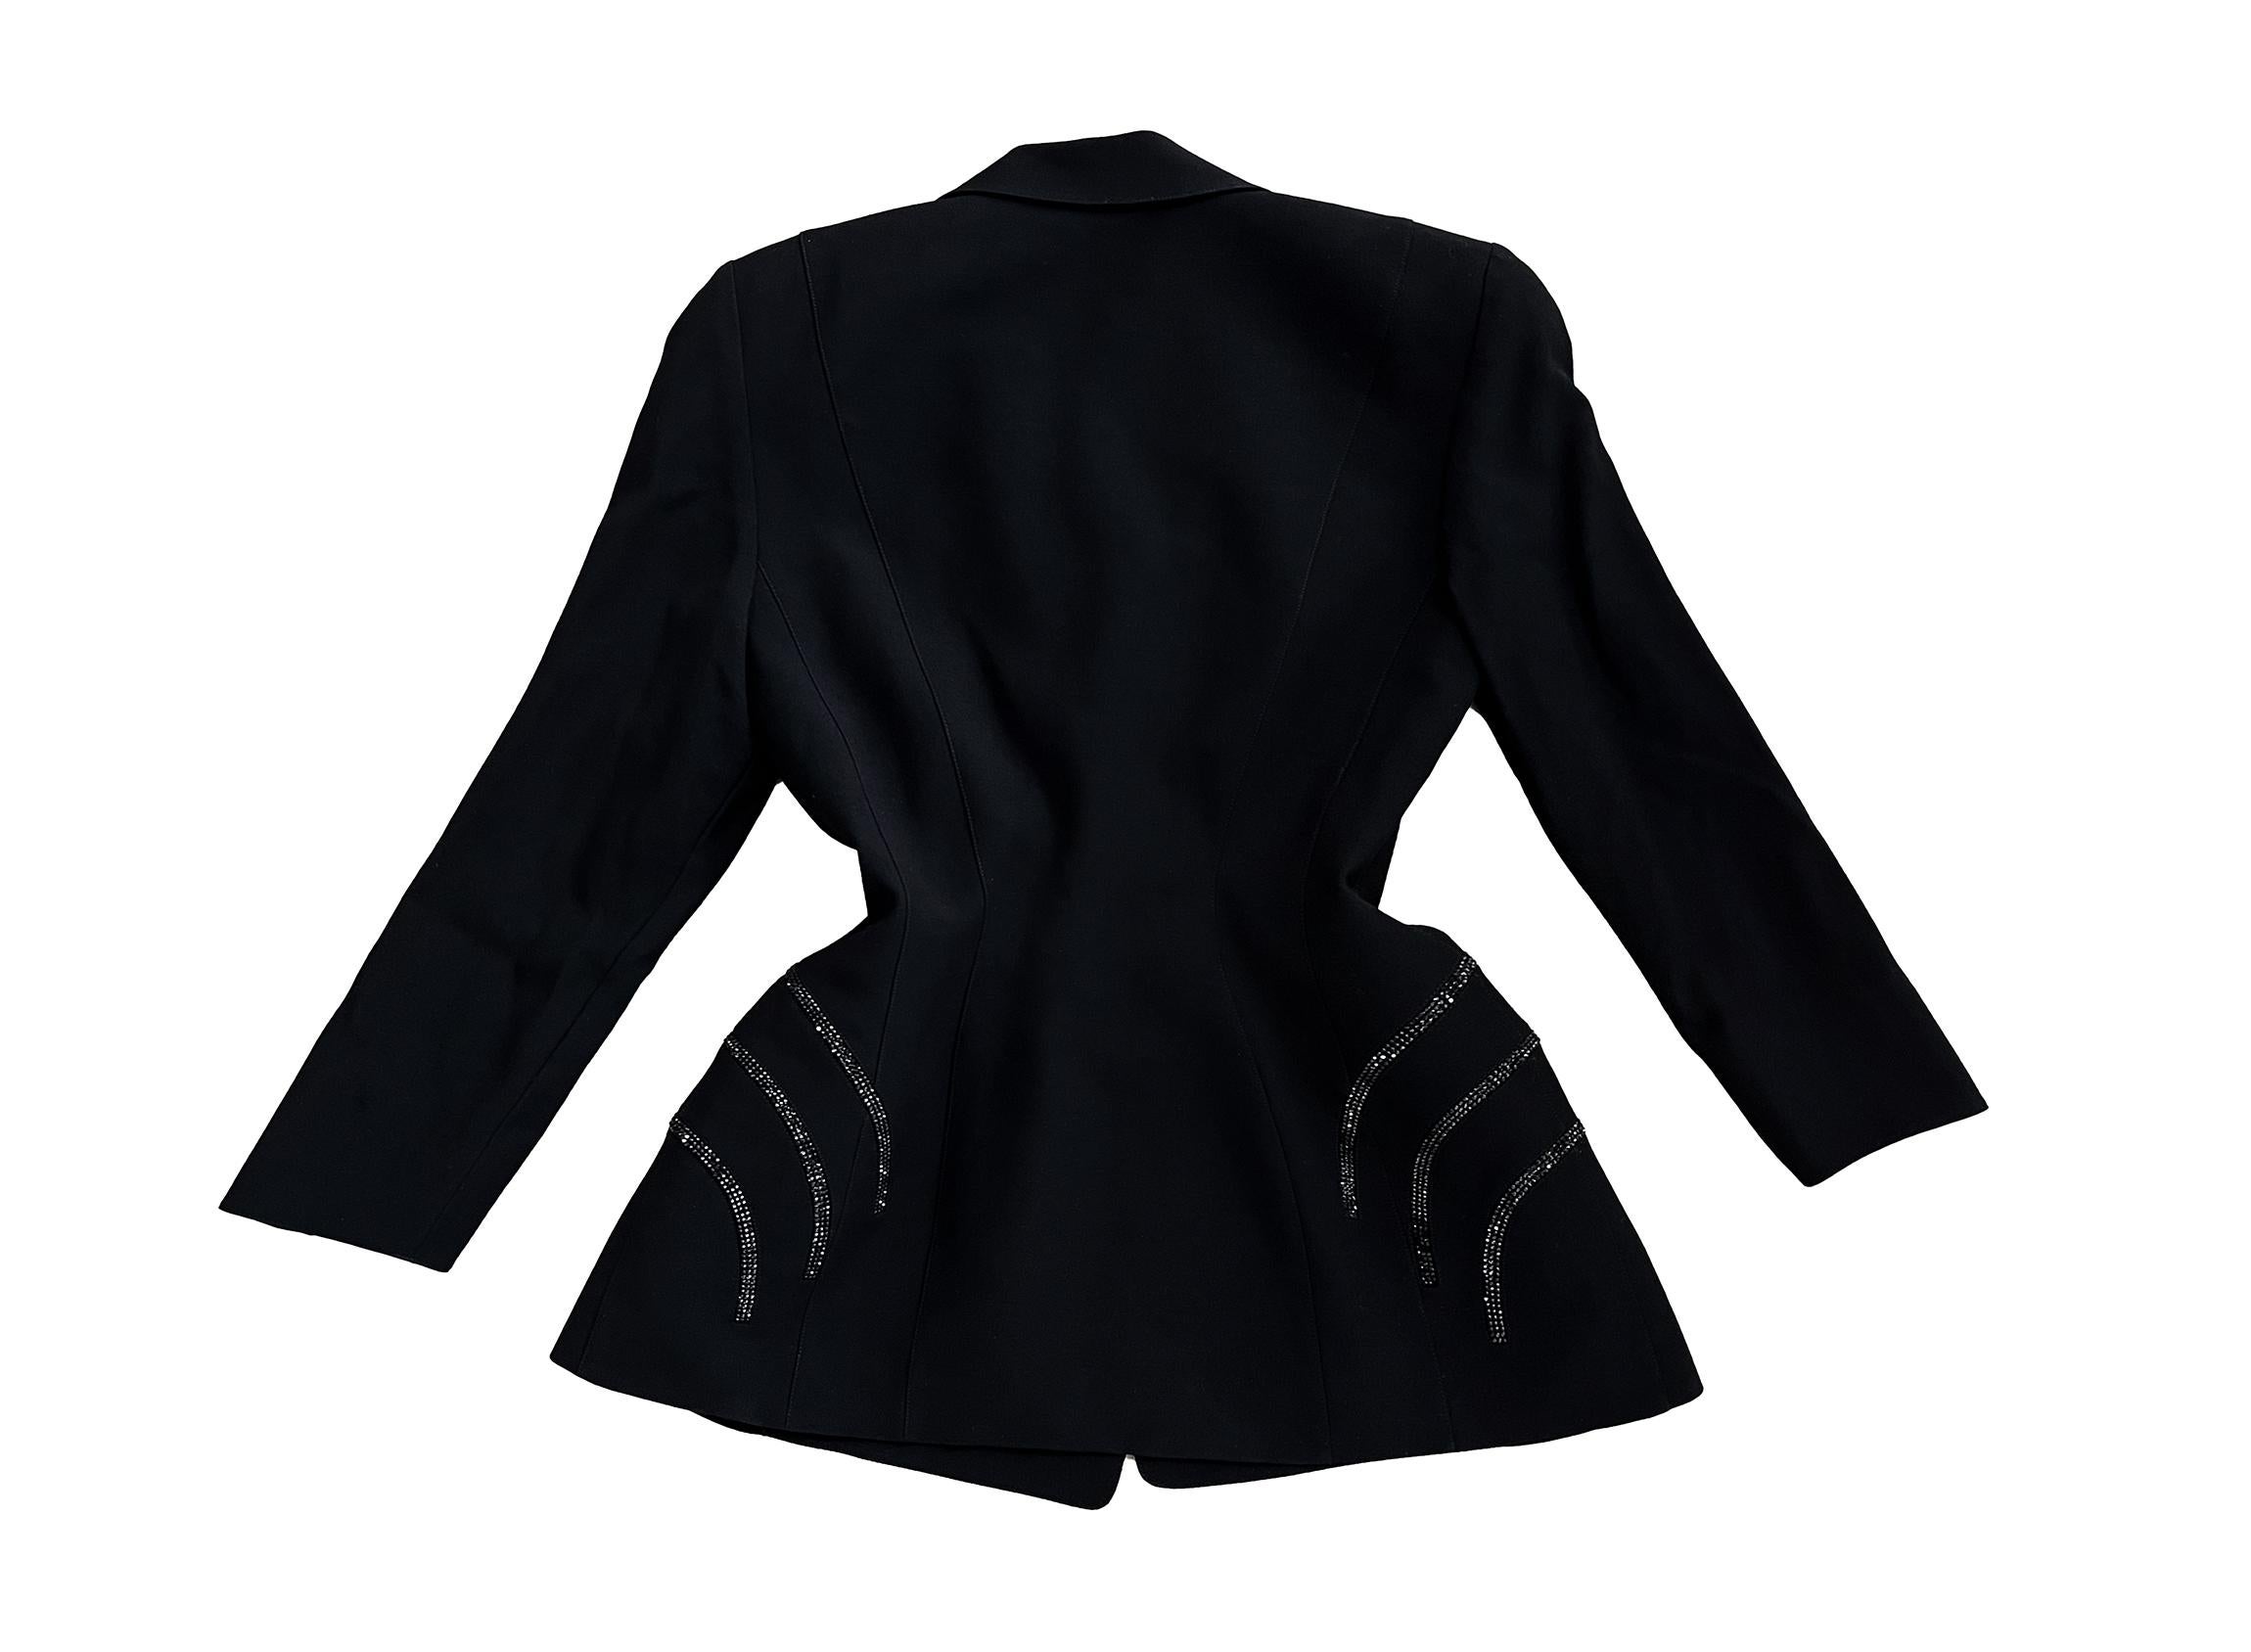 Thierry Mugler Jacket FW 1998 Glamour Dramatic Black Glitter Details For Sale 3